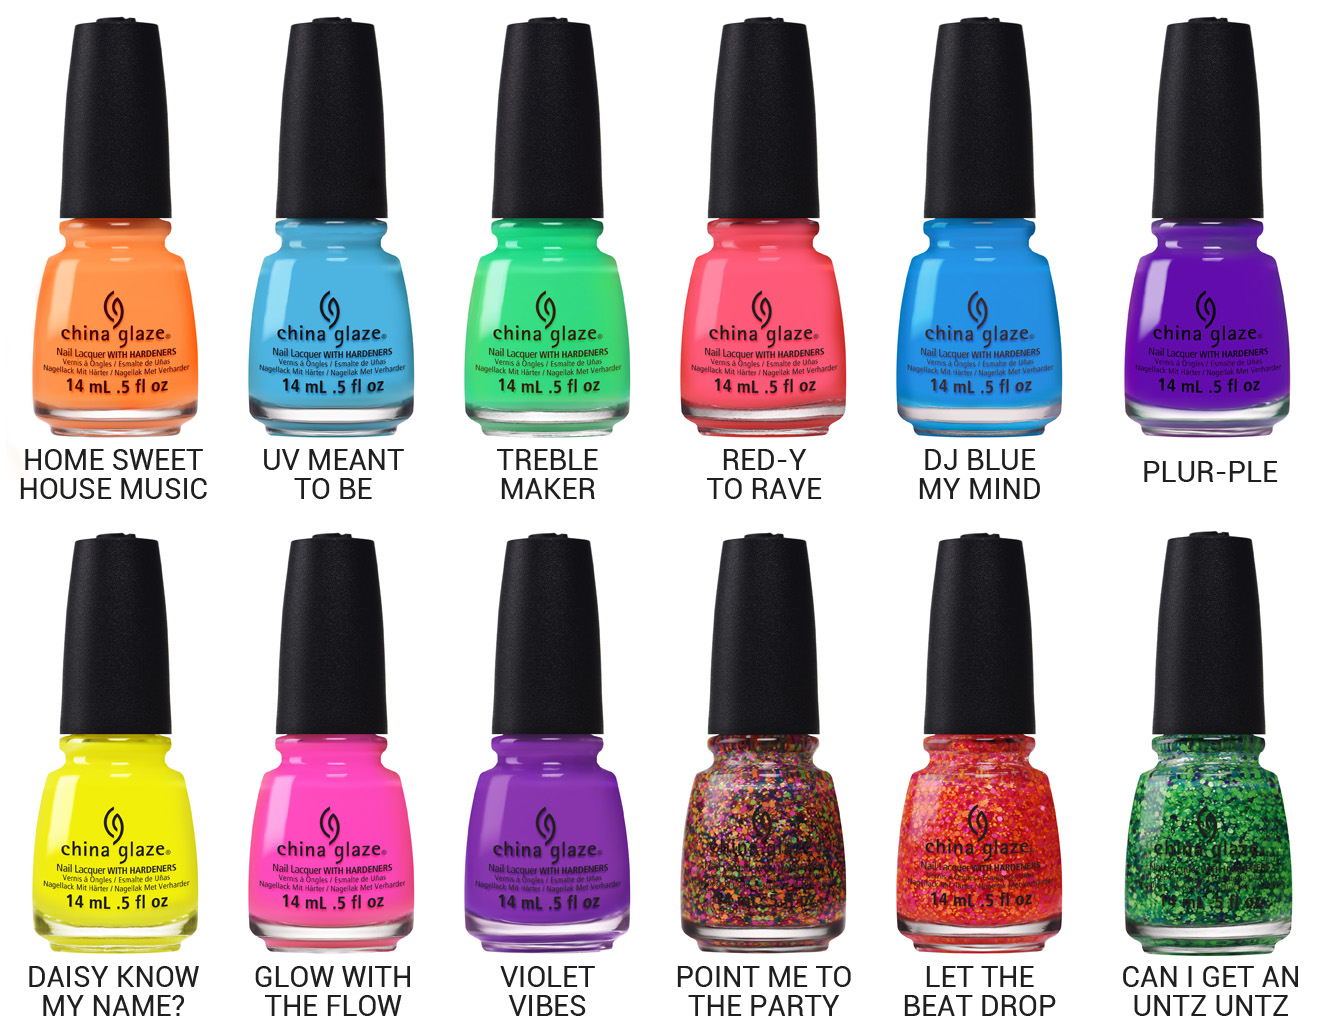 Chalkboard Nails News: China Glaze Electric Nights for Summer 2015